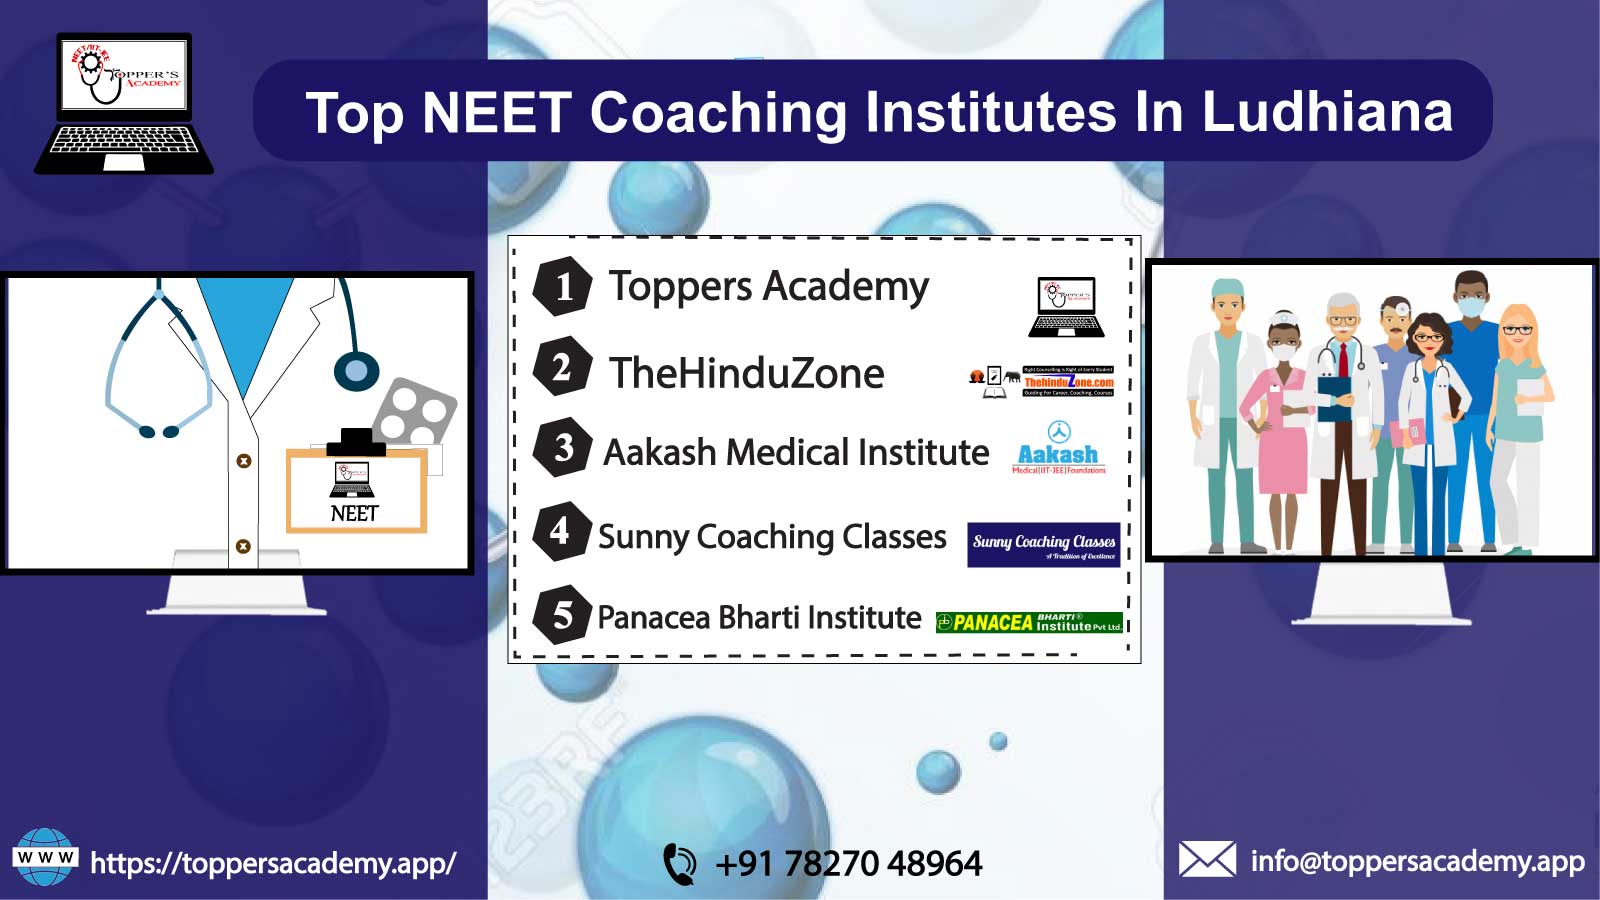 List OF The Top NEET Coaching Institutes In Ludhiana